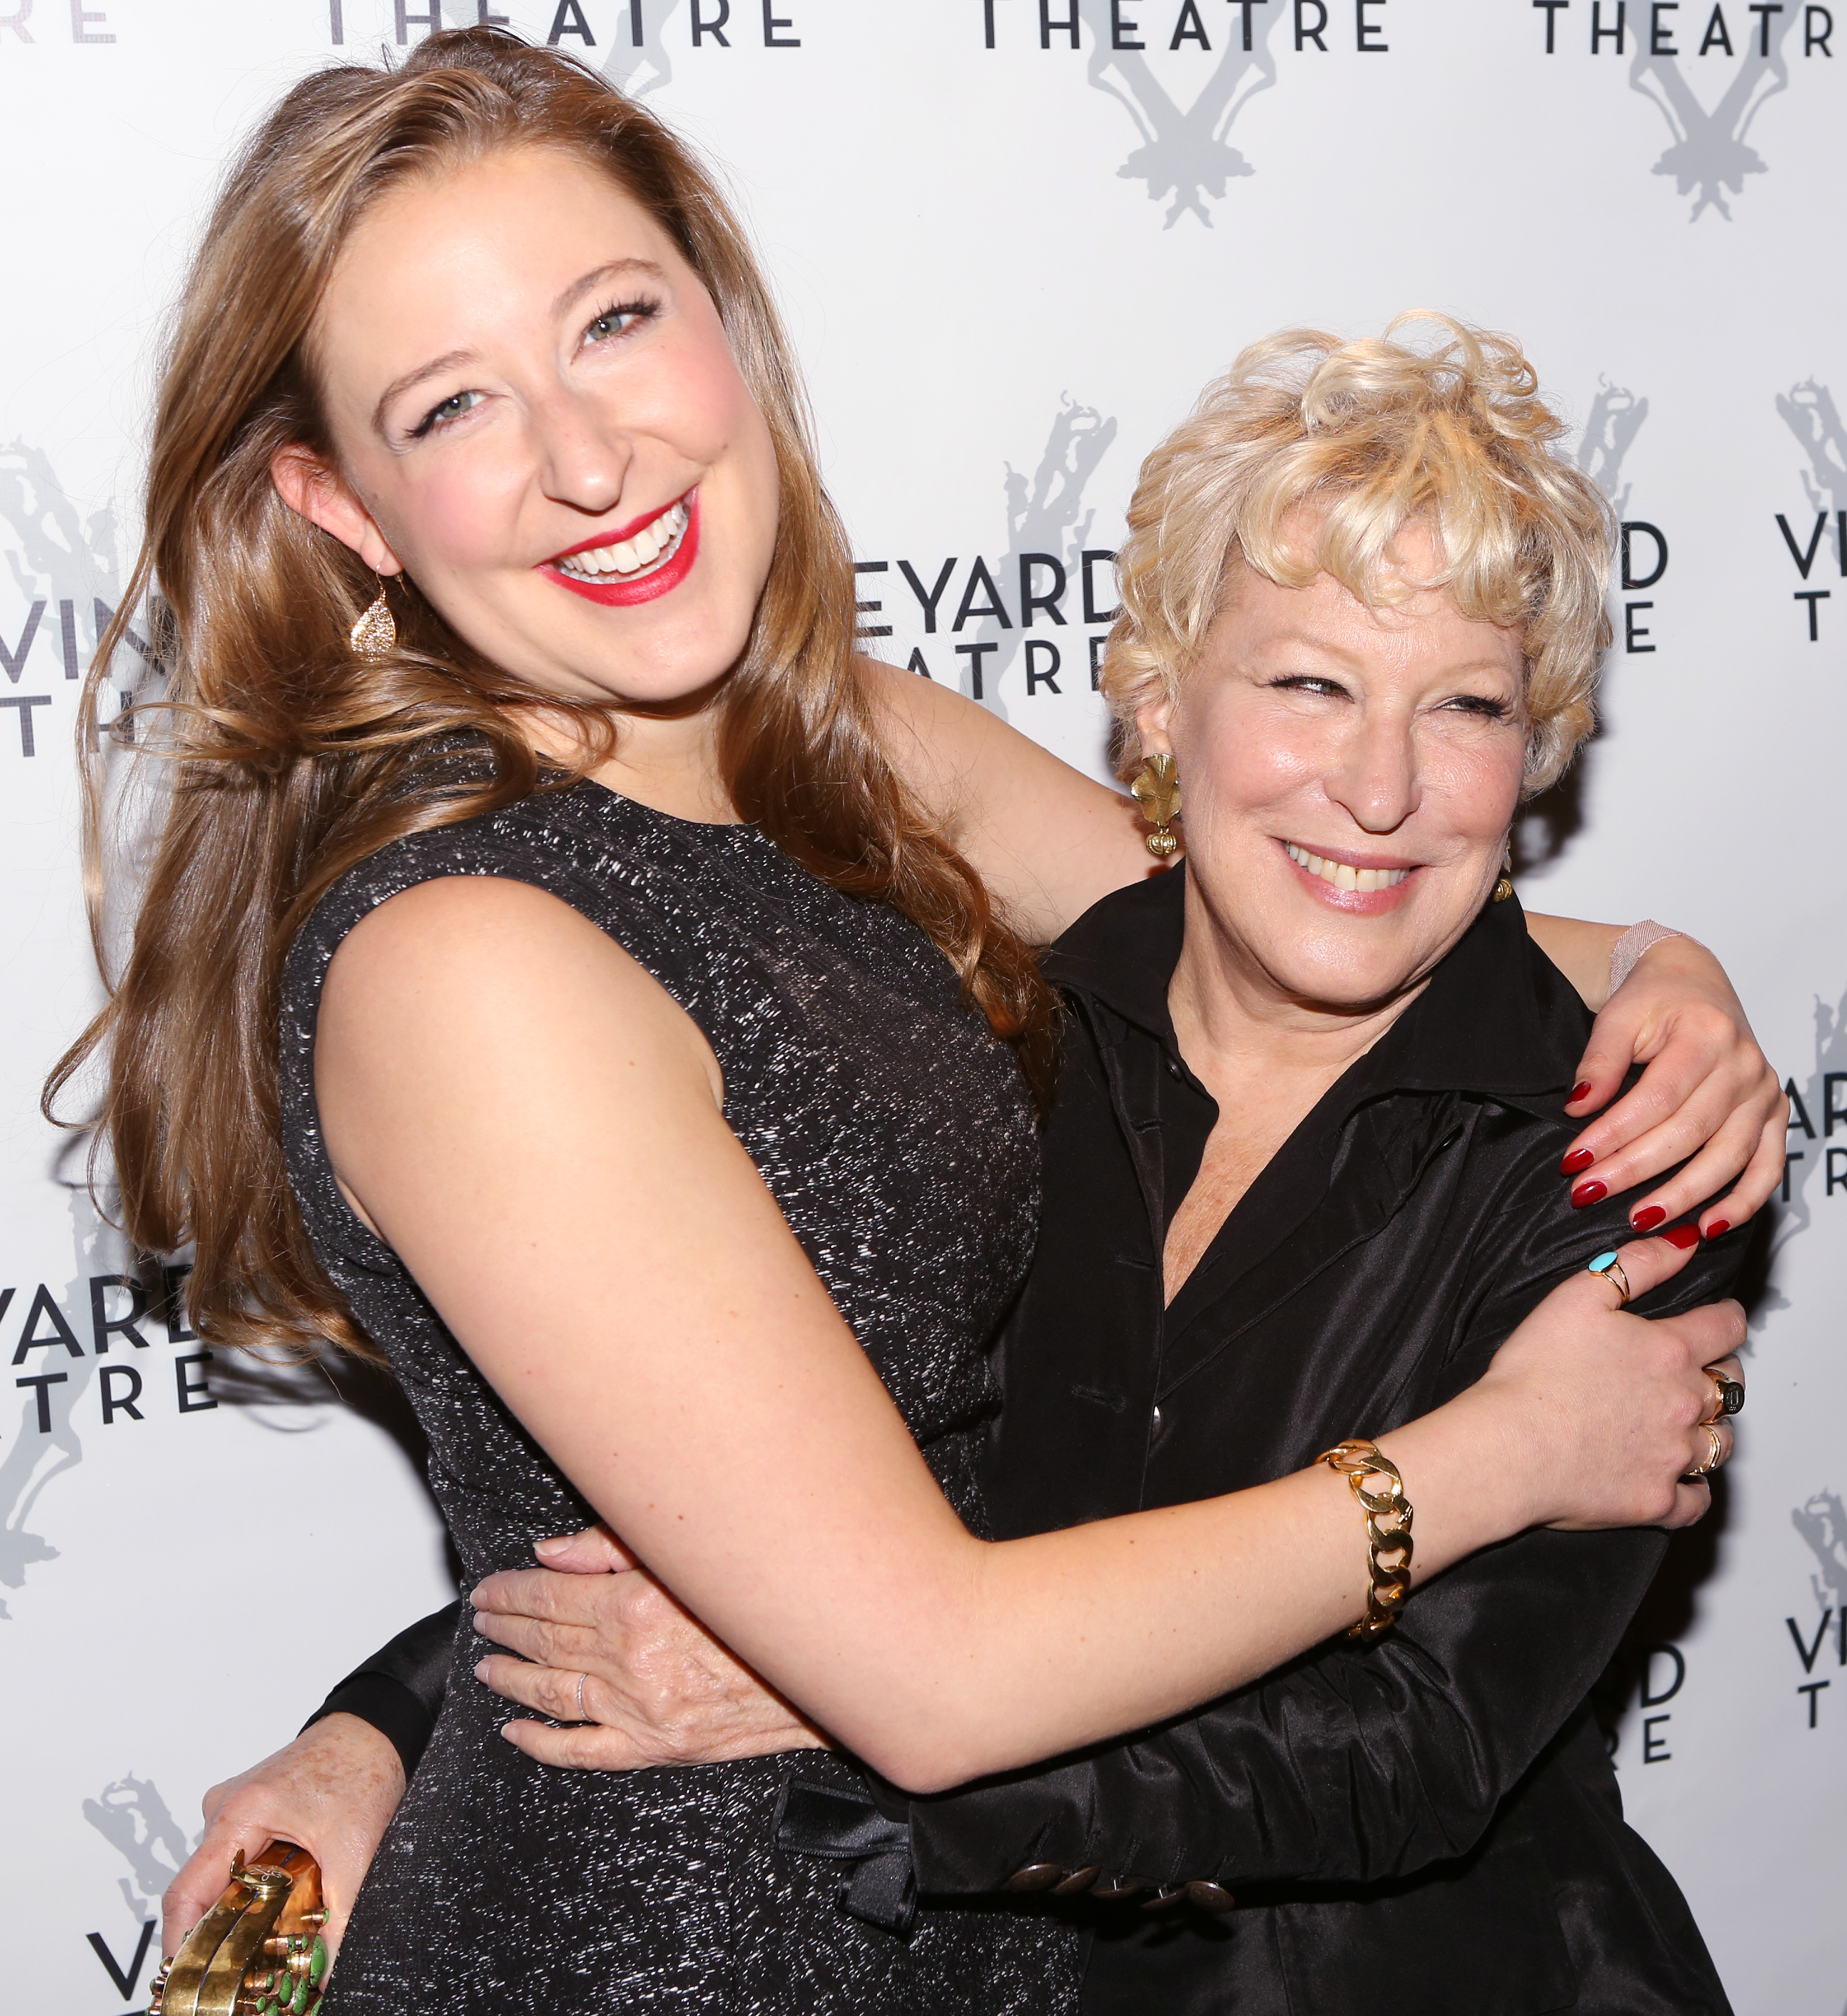 Sophie von Haselberg and Bette Midler at the Off-Broadway opening Night Performance After Party for "Billy & Ray" in New York City, 2014 | Source: Getty Images